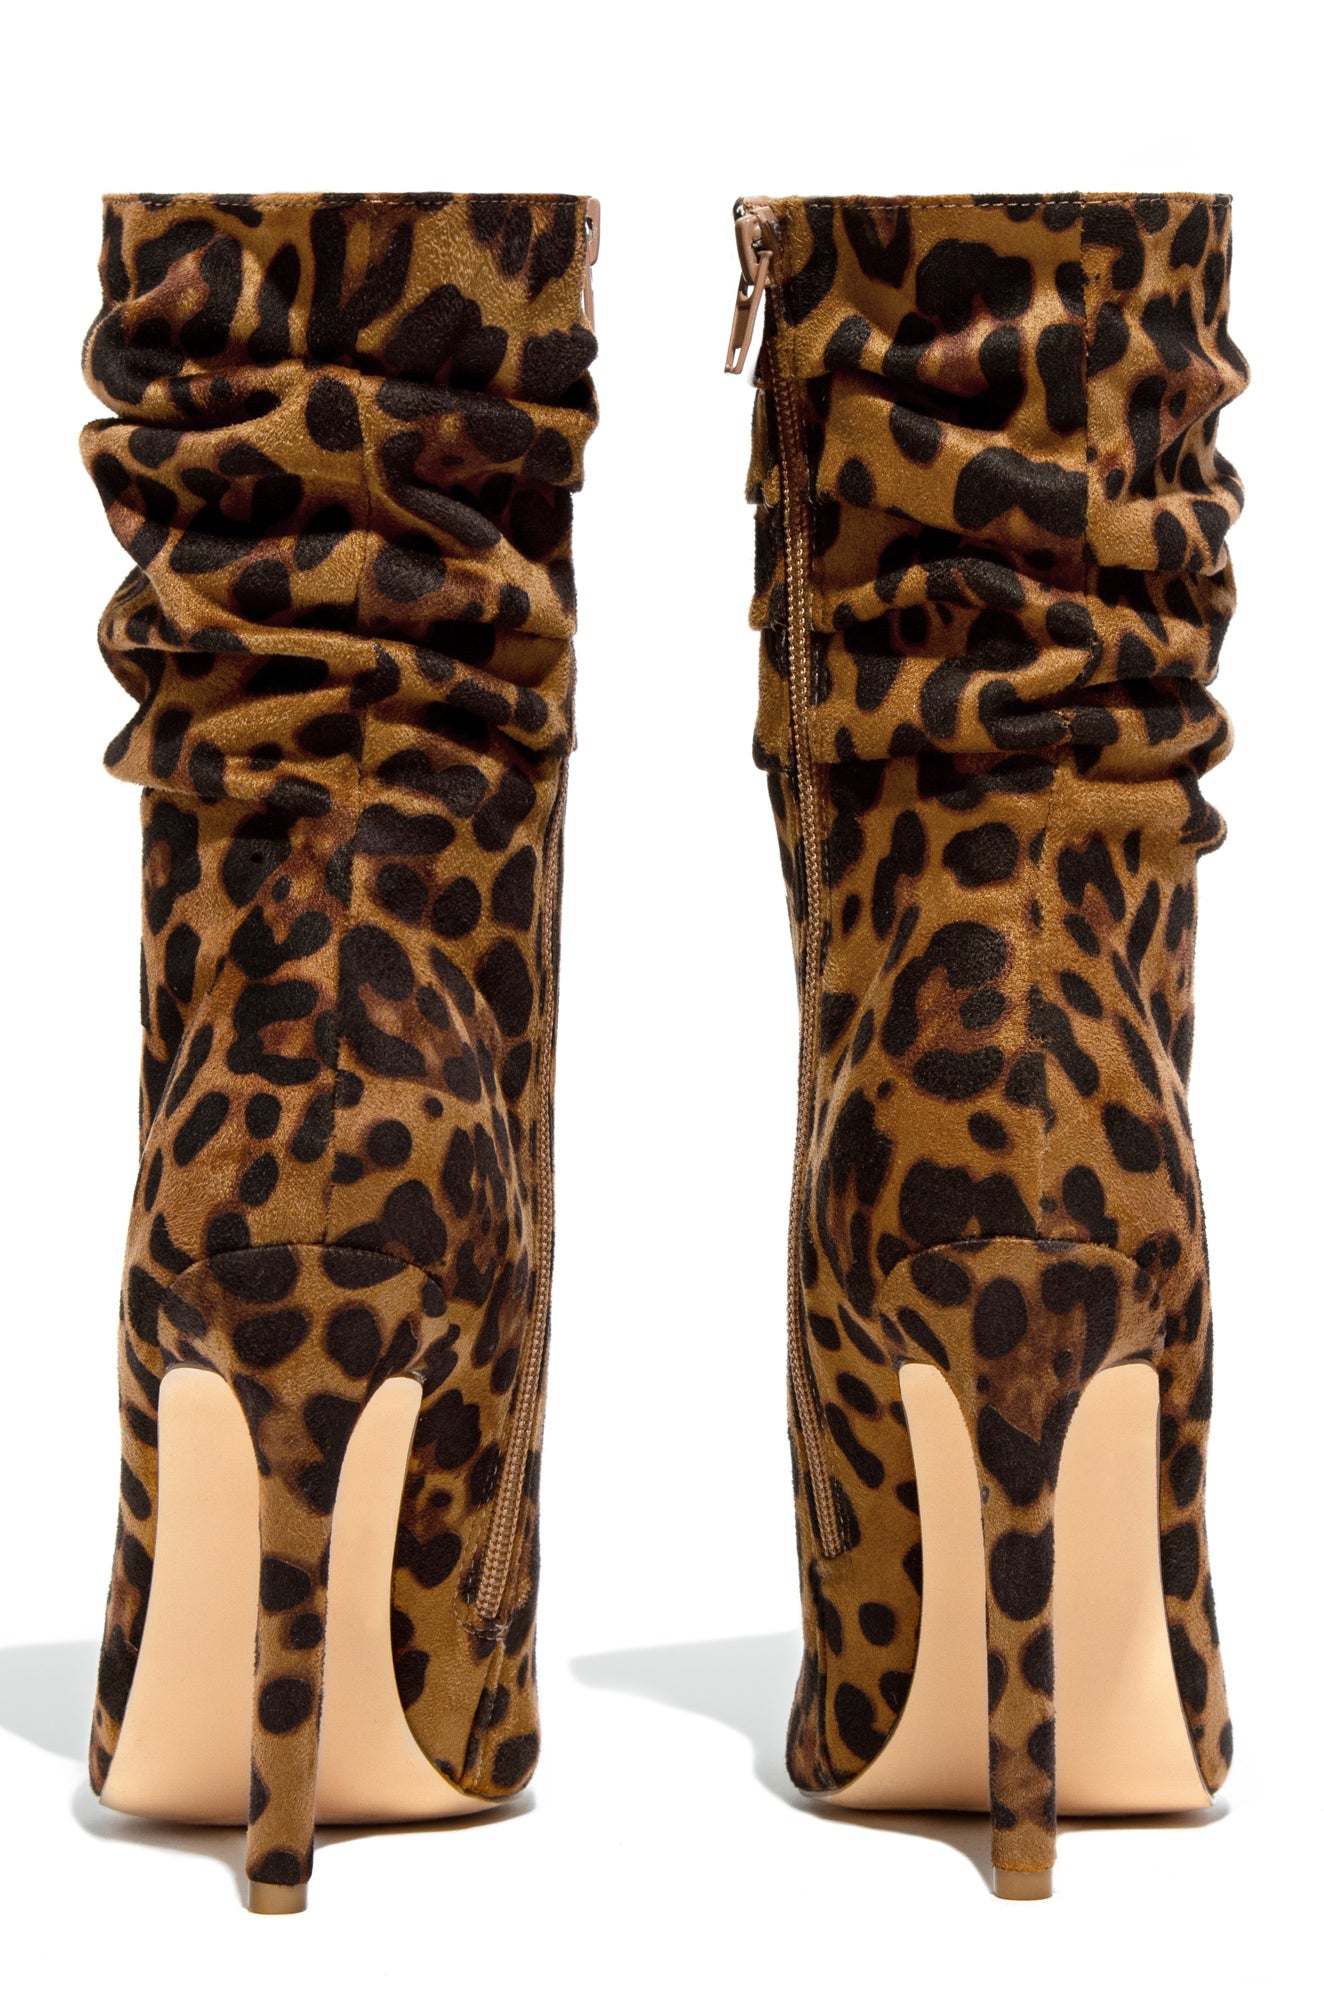 Solemate - Leopard – MISS LOLA